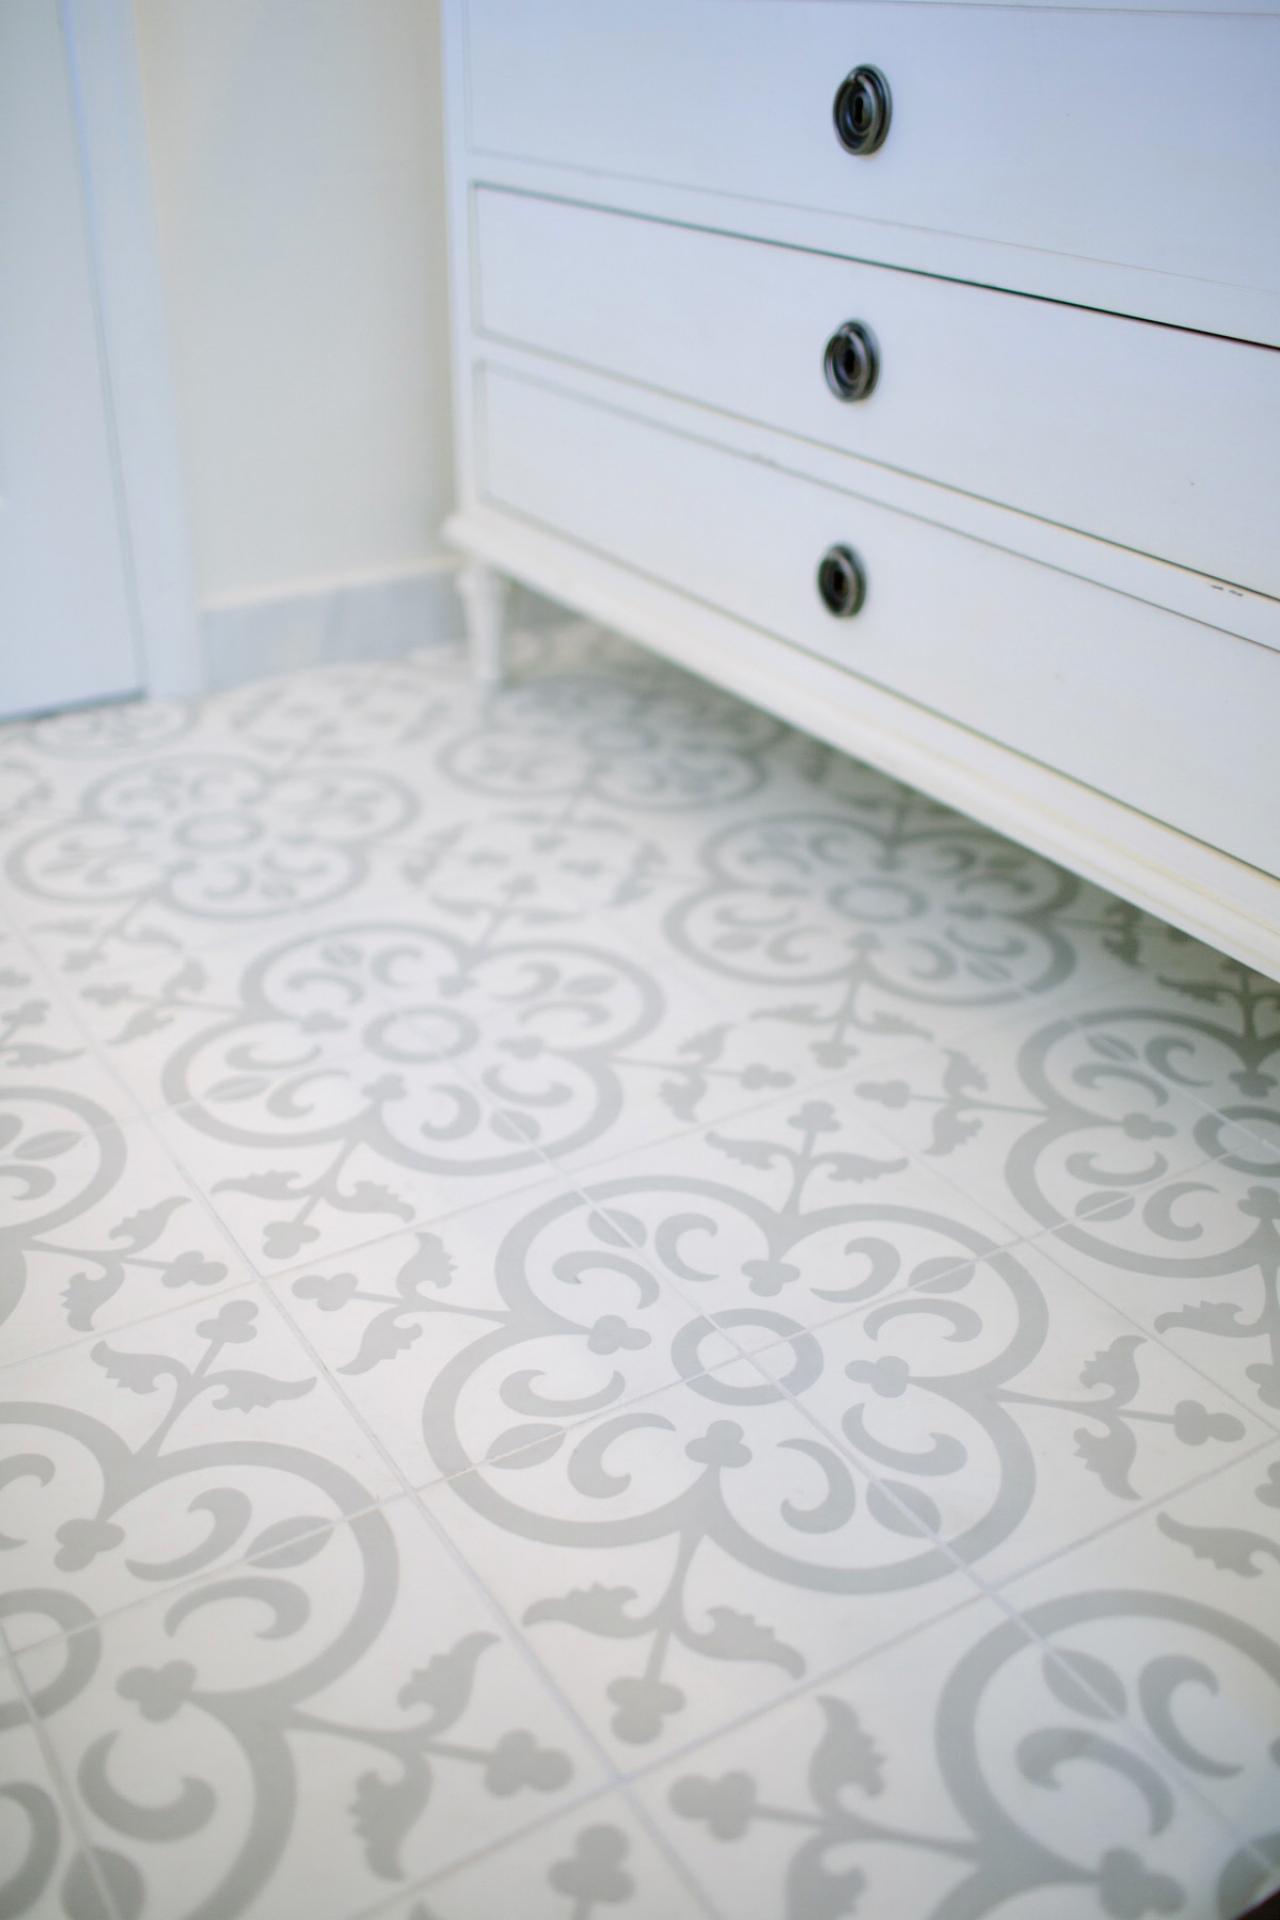 Average Cost To Install Tile Floor, How Much Does Porcelain Tile Flooring Cost Per Square Foot